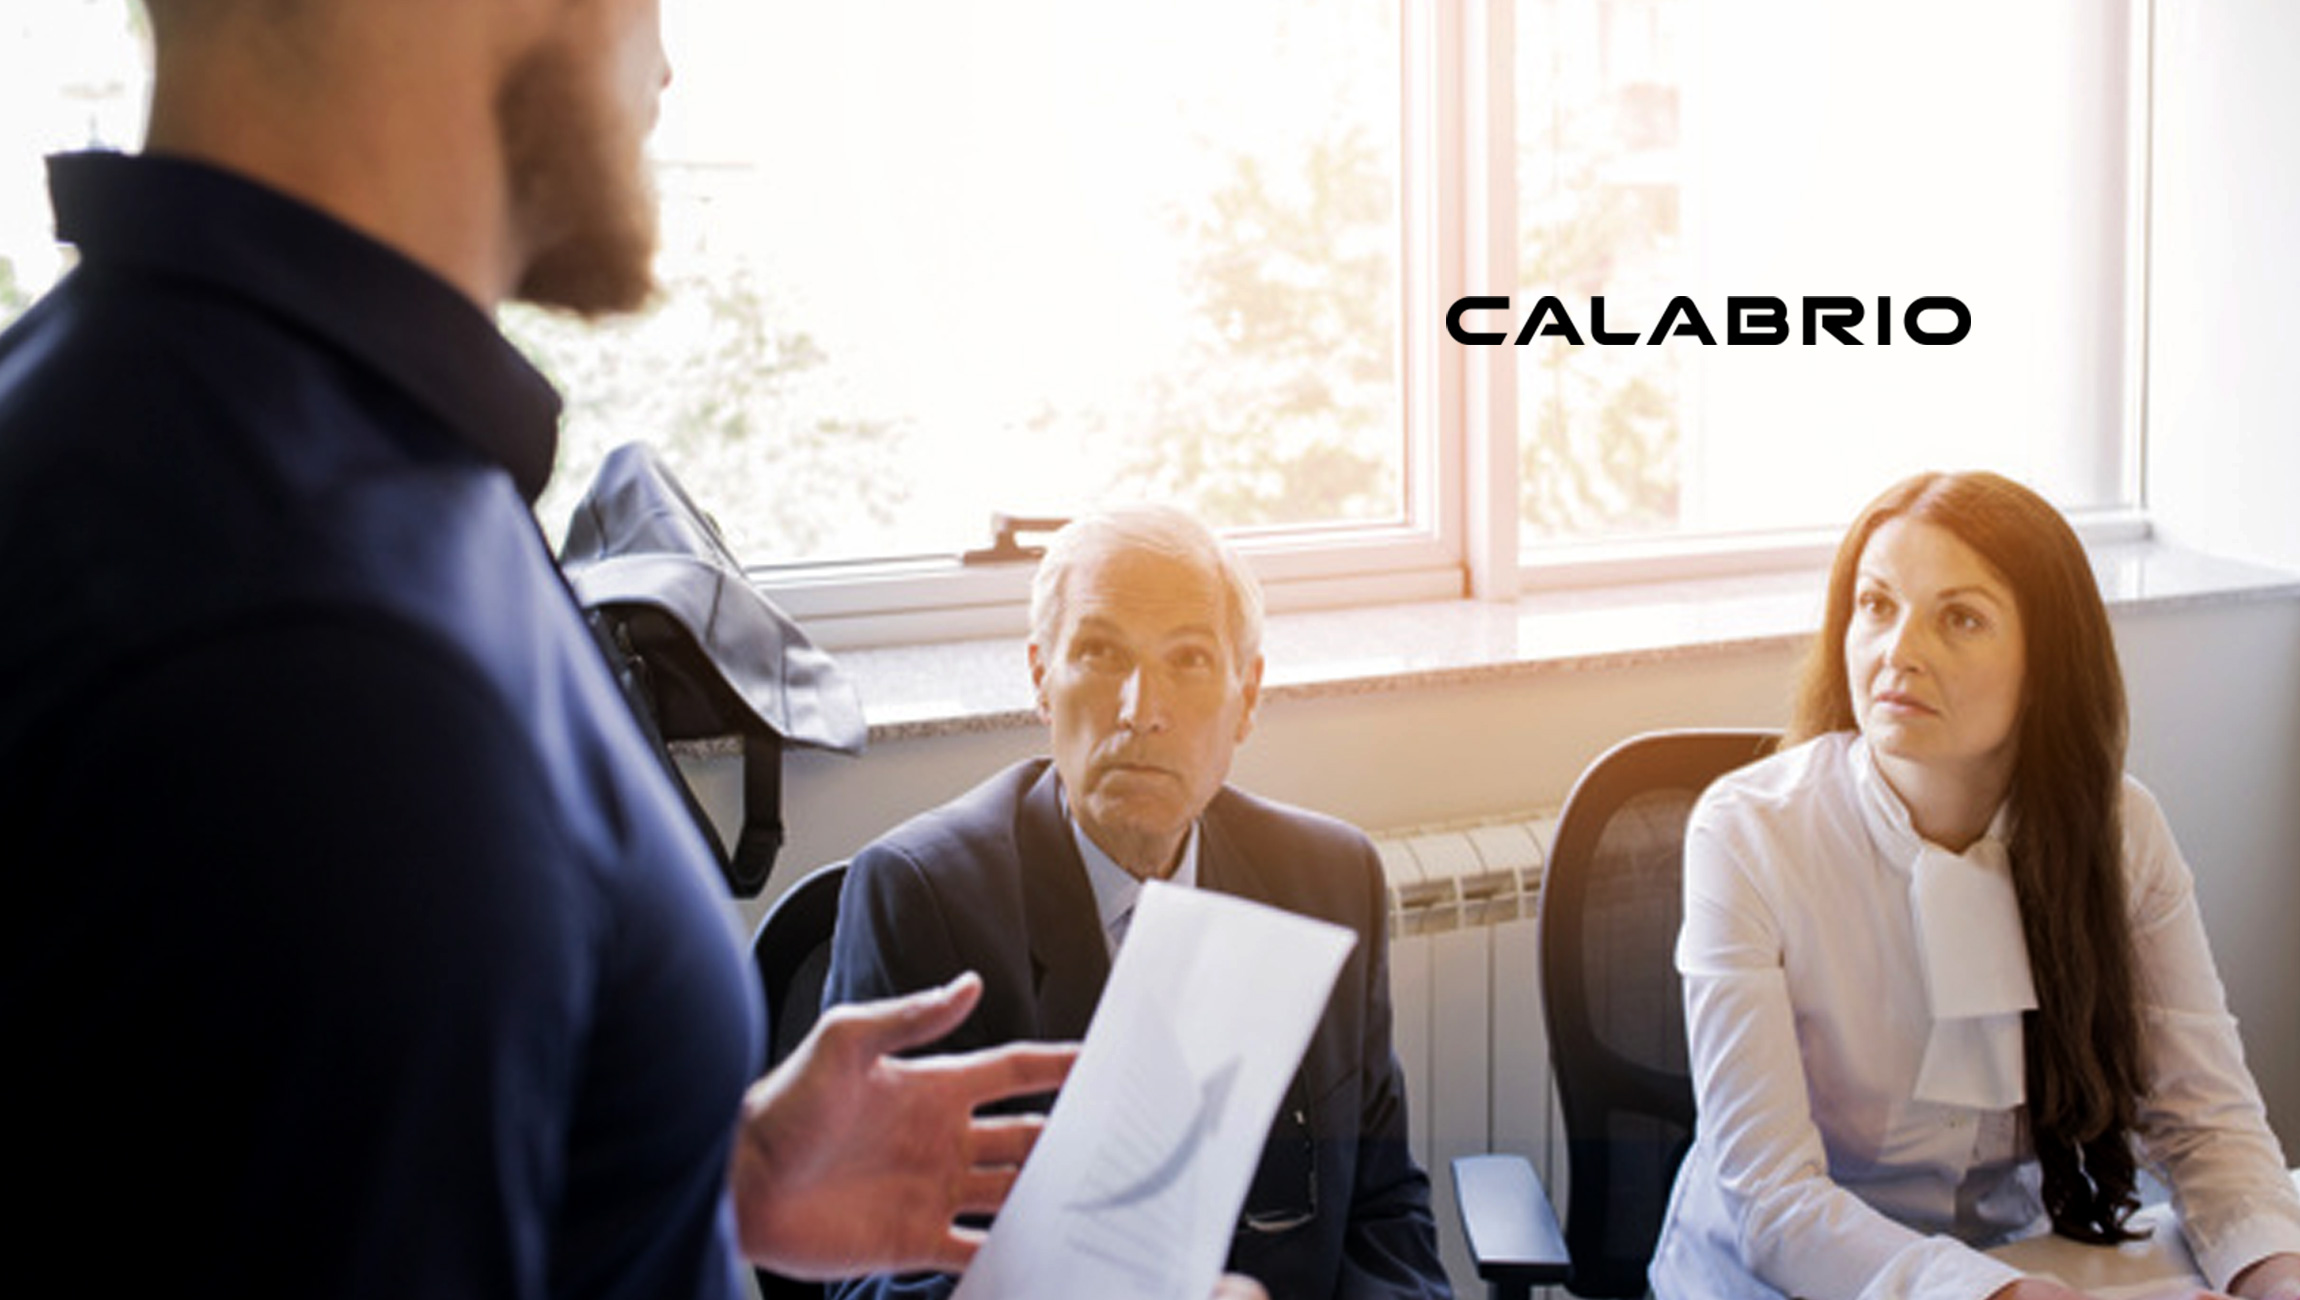 Calabrio Hires First Chief Revenue Officer to Fuel Continued Hyper-Growth